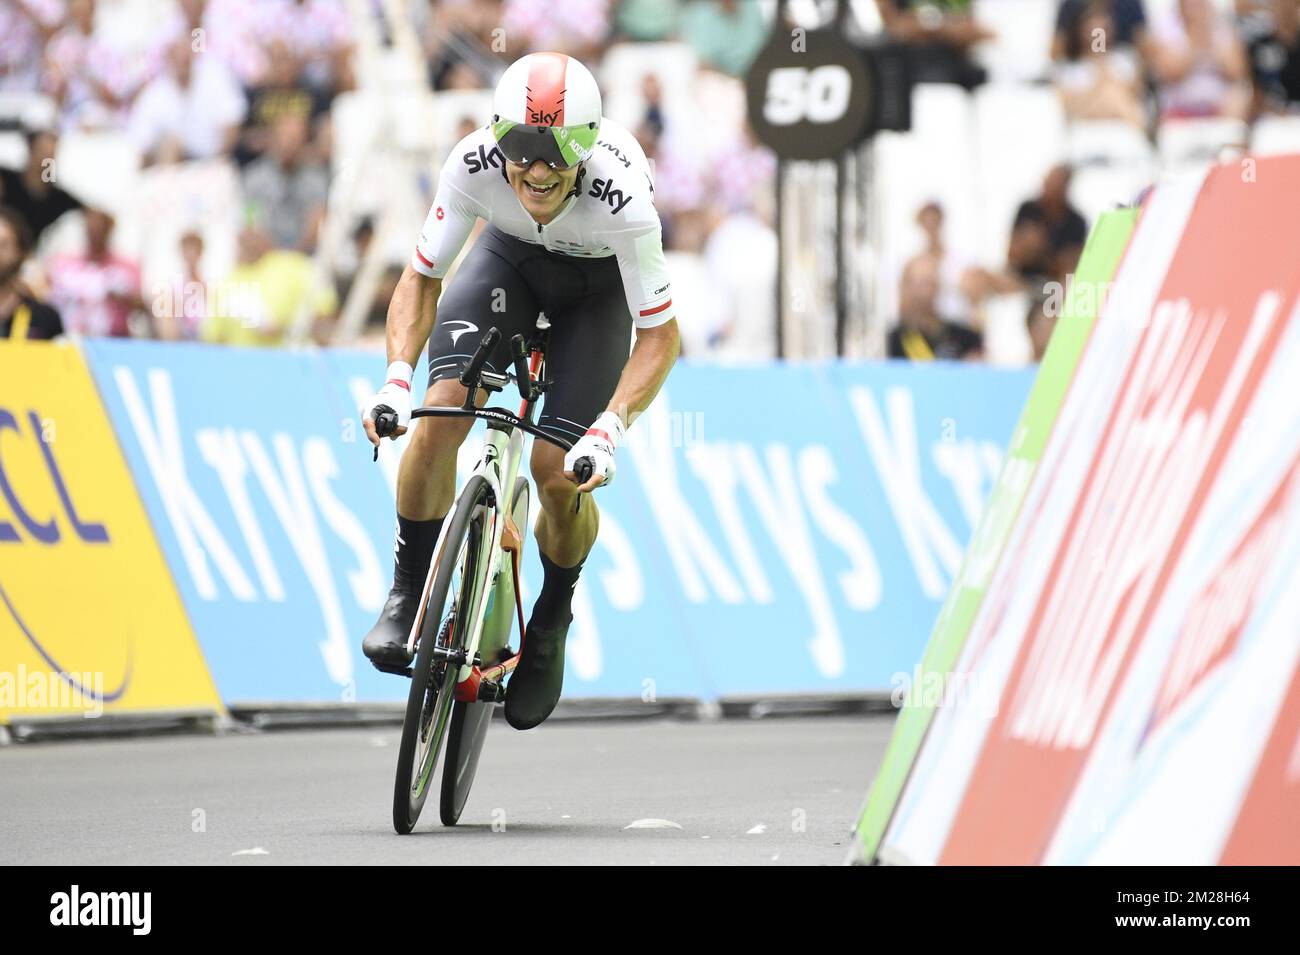 UNCROPPED VERSION - Polish Michal Kwiatkowski of Team Sky crosses the finish line, of the twentieth stage of the 104th edition of the Tour de France cycling race, an individual time trial in Marseille, France, Saturday 22 July 2017. This year's Tour de France takes place from July first to July 23rd. BELGA PHOTO YORICK JANSENS  Stock Photo